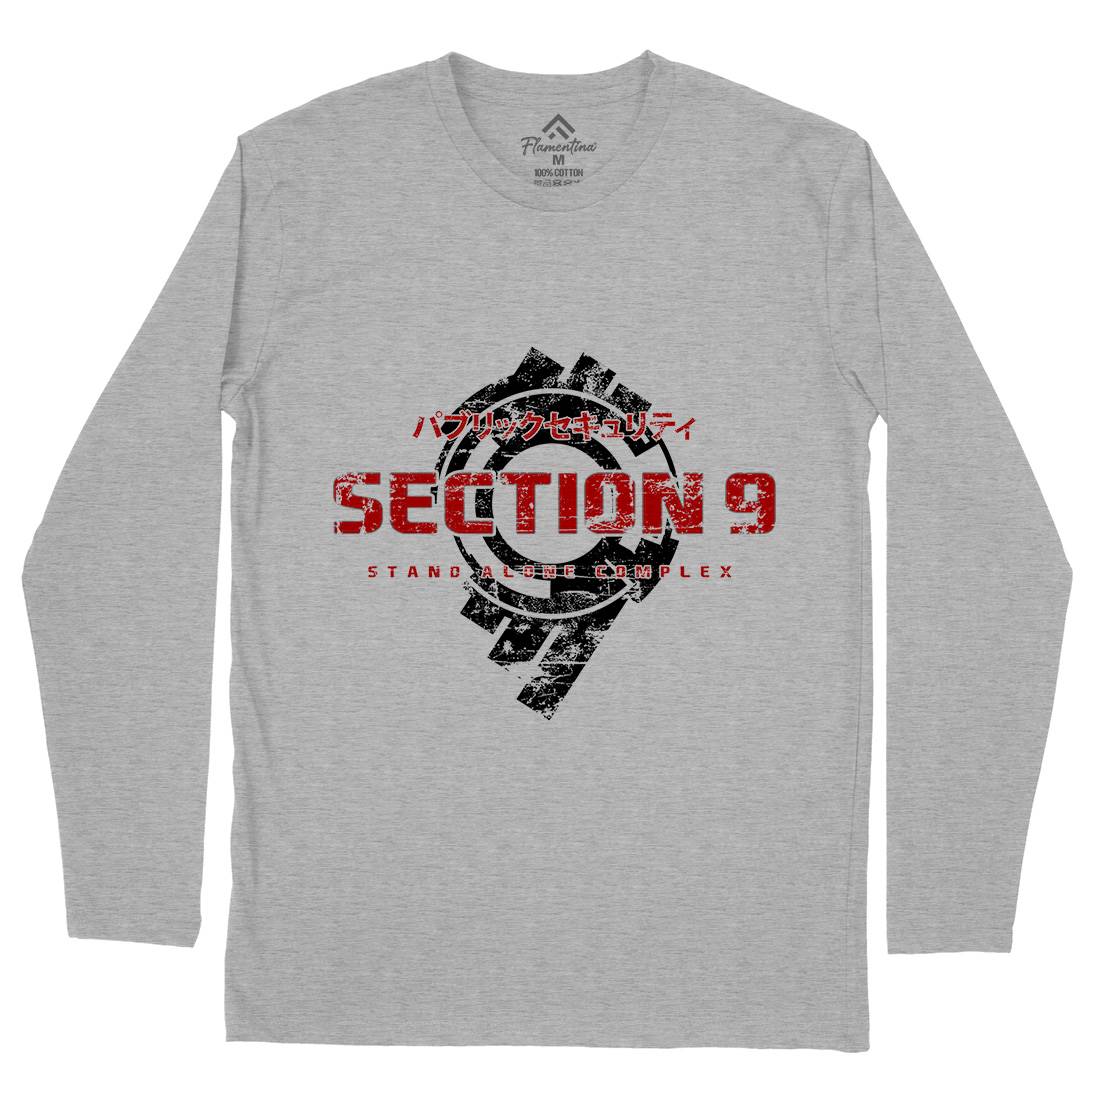 Section 9 Mens Long Sleeve T-Shirt Space D193